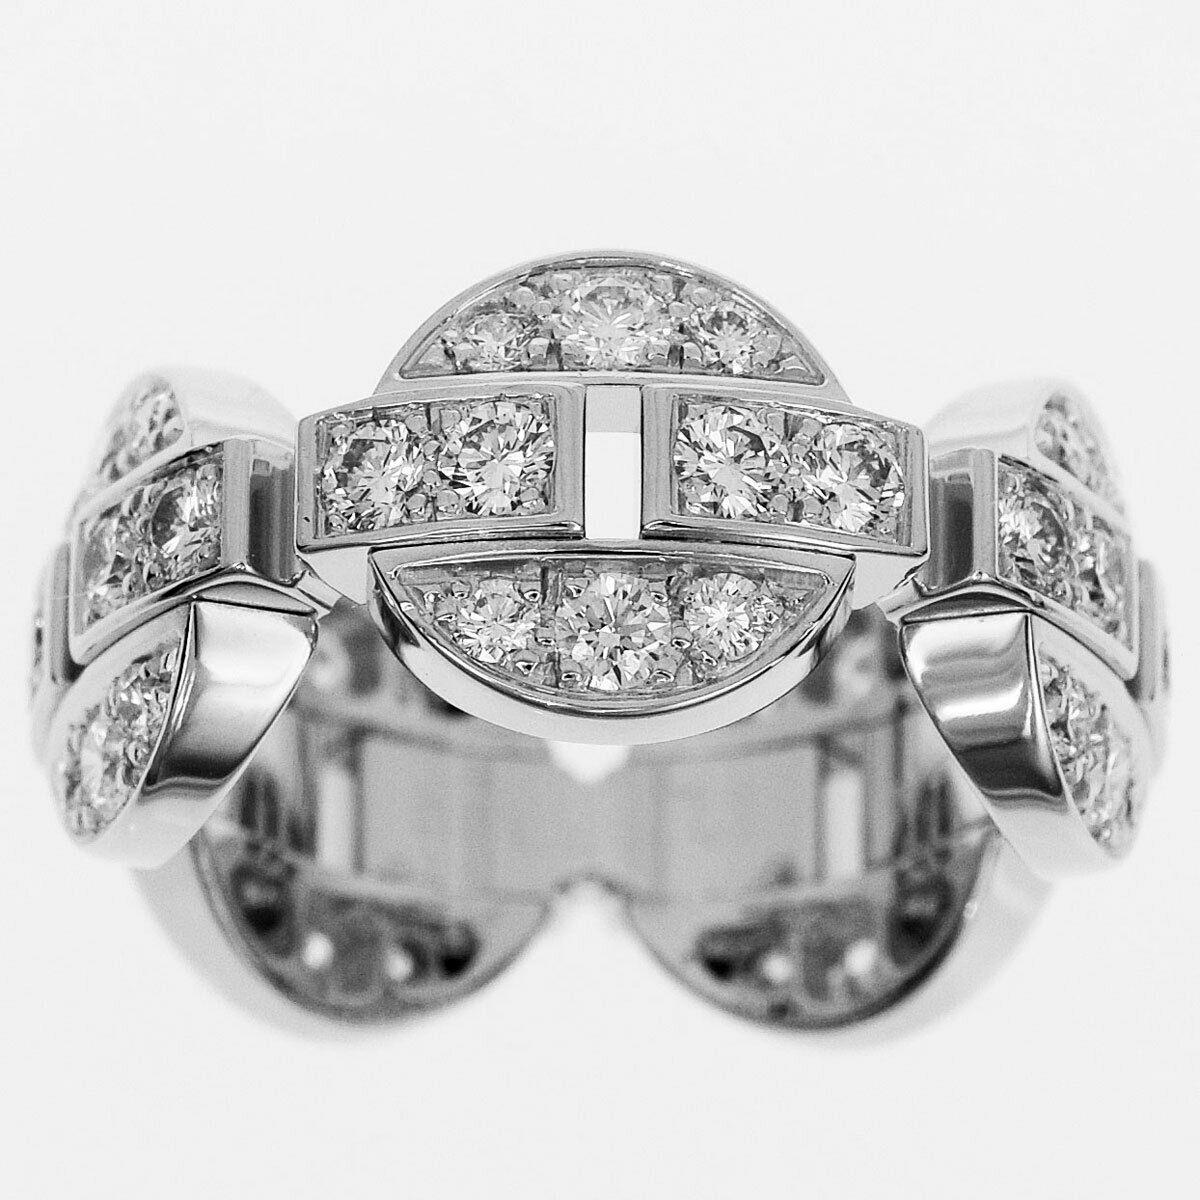 Beautiful ring from famed jewelry designer Cartier. This ring is crafted in 18k white gold and is set with natural diamonds throughout. The ring shows circular links that are spaced out creating a one of a kind look. The ring is a size 54 which